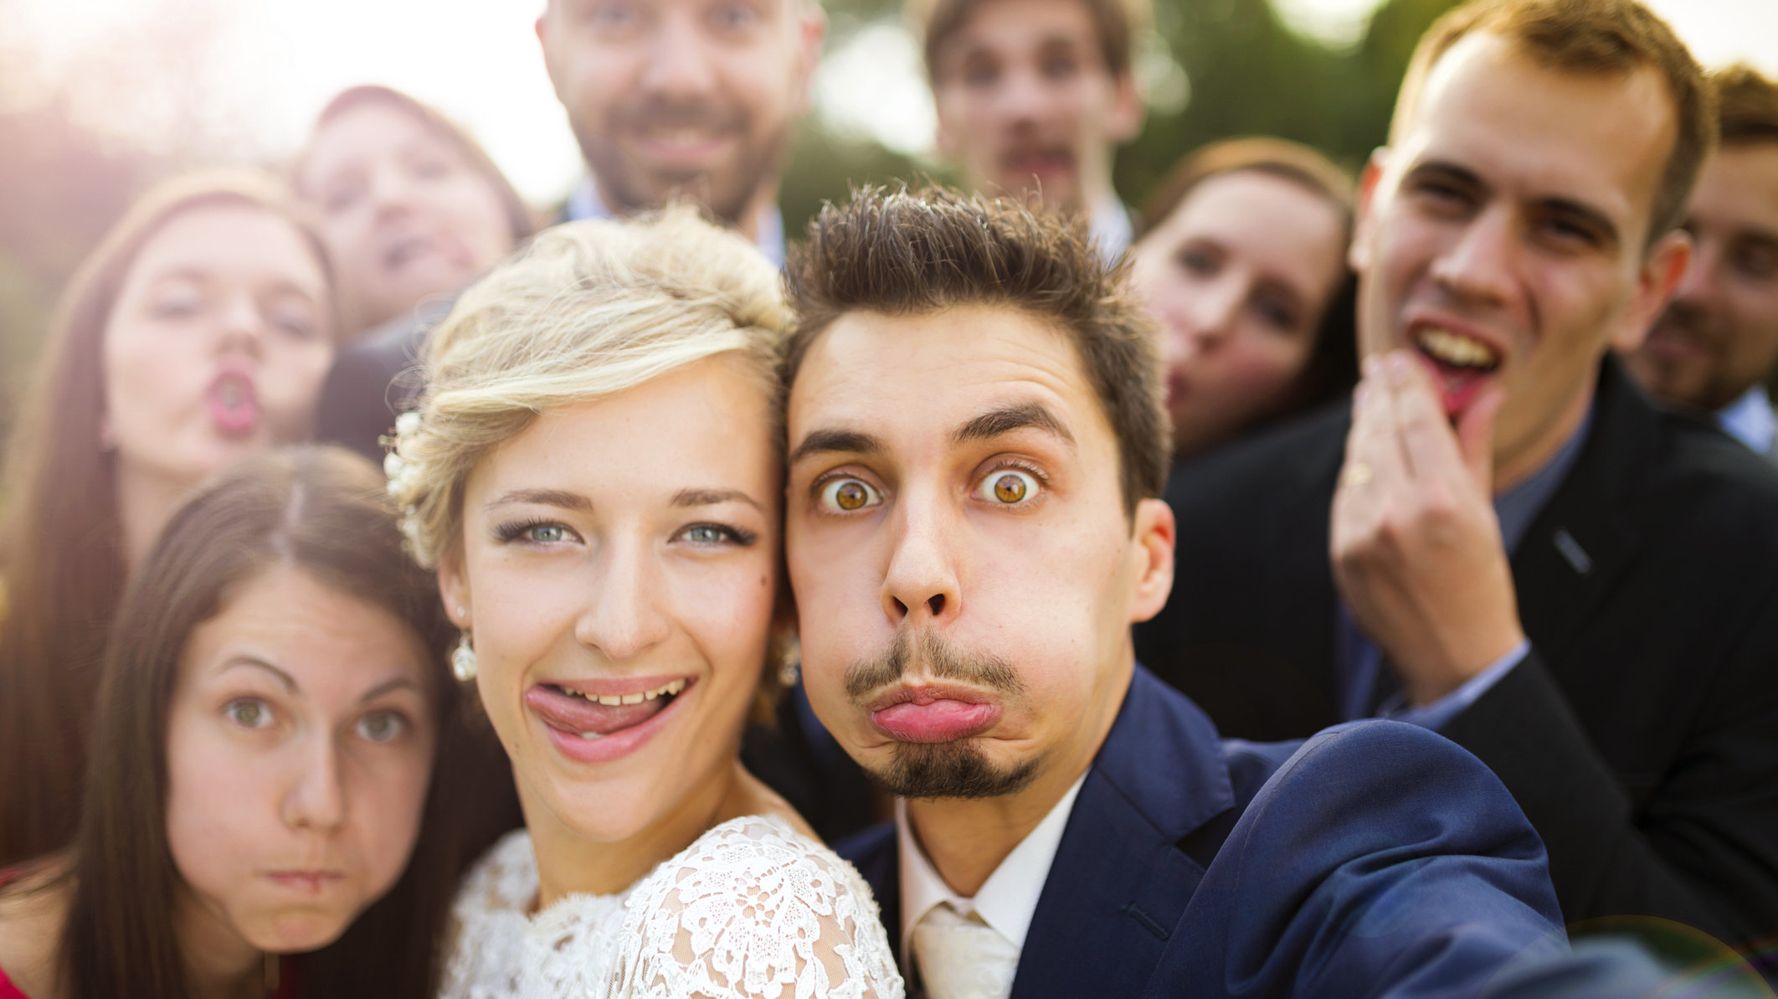 The Most Annoying Requests Wedding Guests Have Made